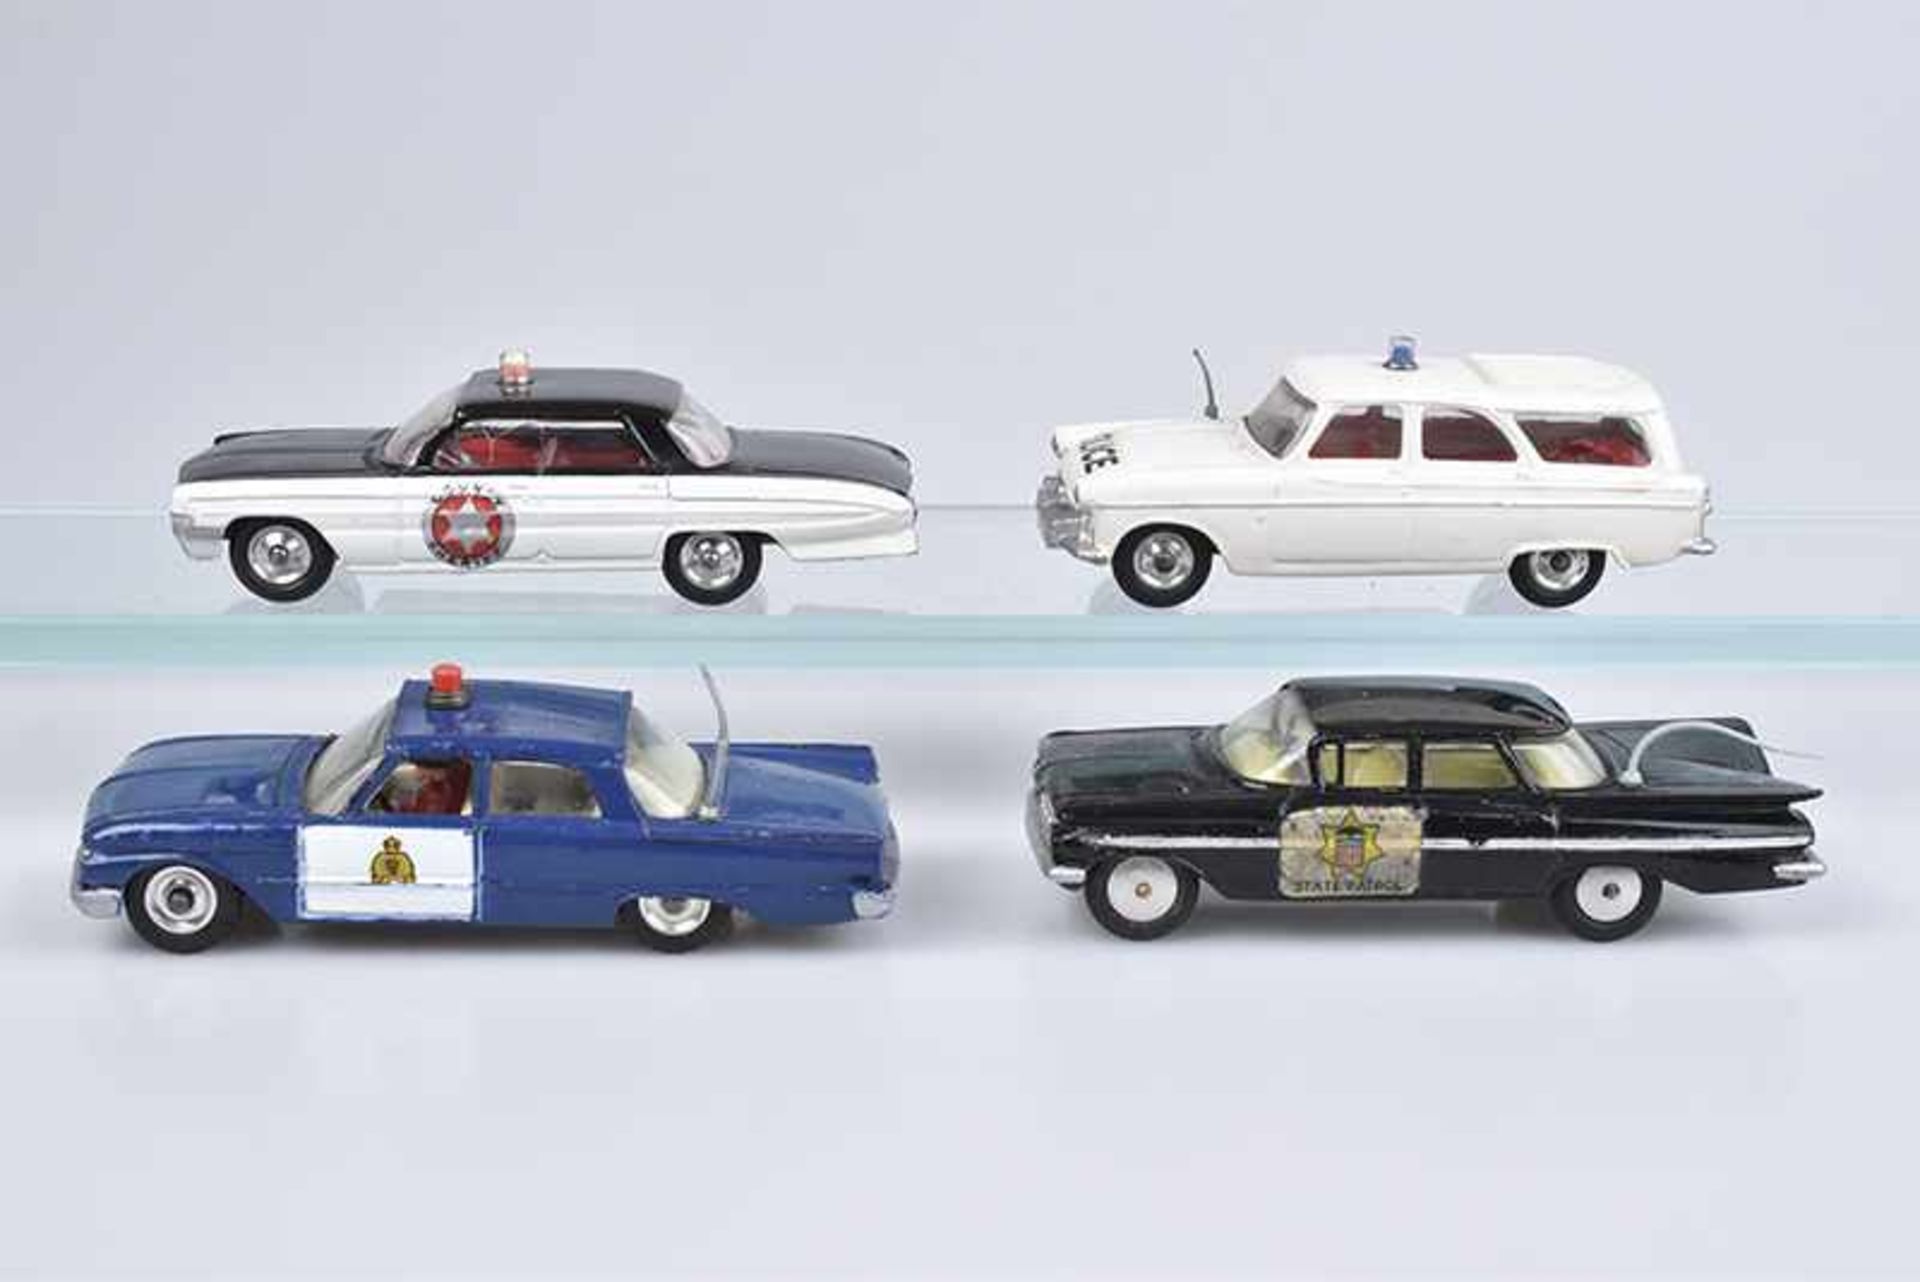 DINKY TOYS 4 Modellfahrzeuge, Metall, Ford Fairlane, Made in England, Chevrolet Impala, Ford